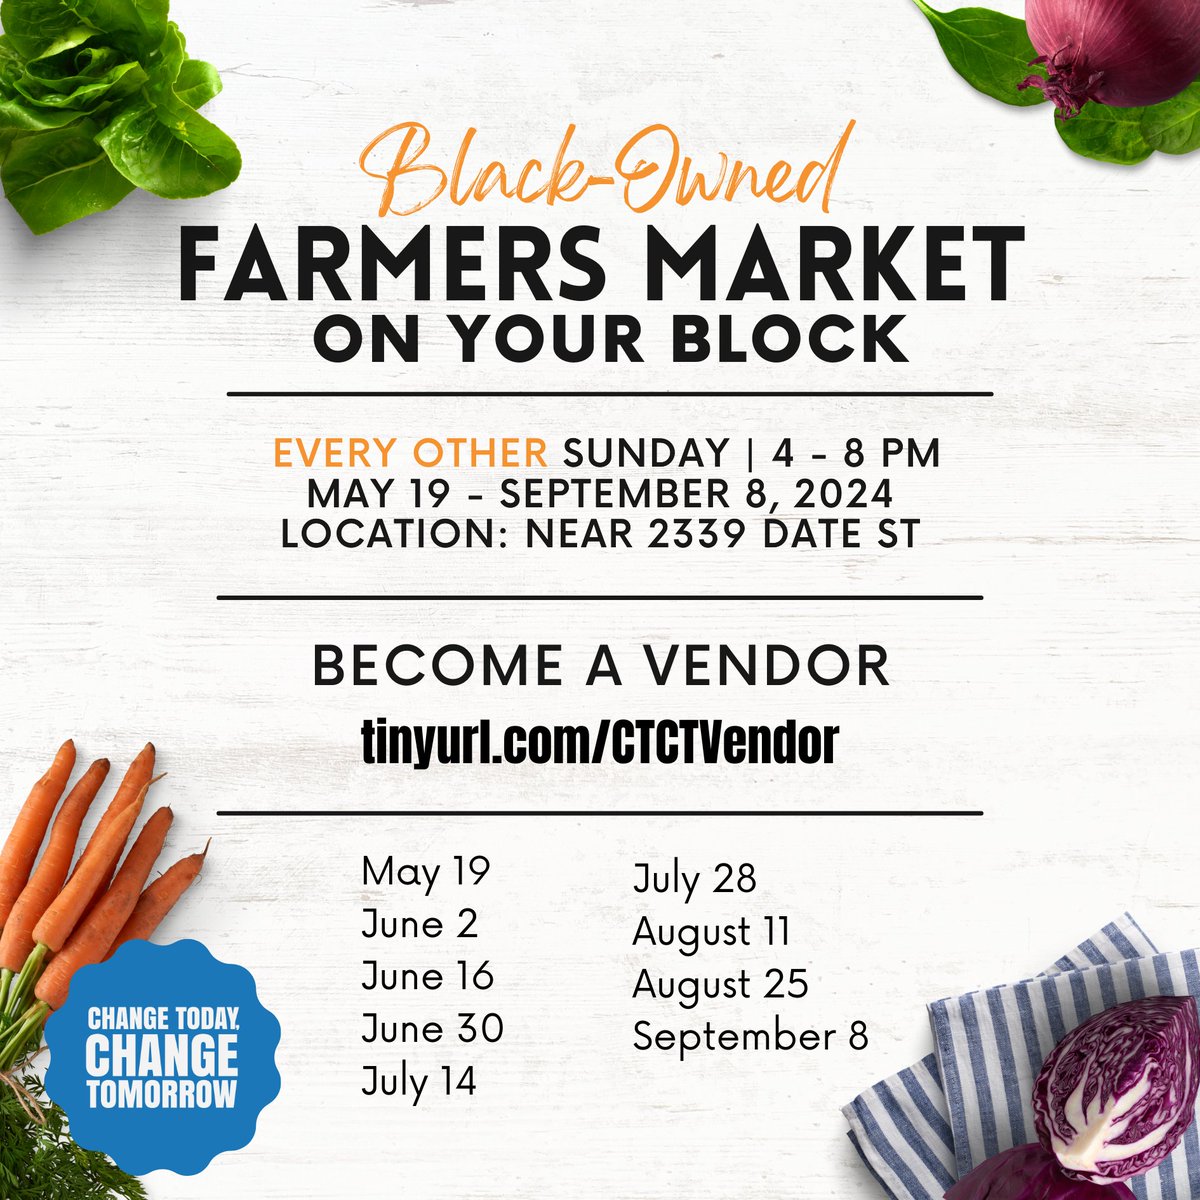 🌽🍎 Exciting news! There will be a Black-Owned Farmers Market every other Sunday from May 19 to September 8, from 4-8 PM. Support local vendors and come check out the amazing produce and products near 2339 Date St! Want to become a vendor? Sign up at tinyurl.com/CTCTVendor 🌶️🥕